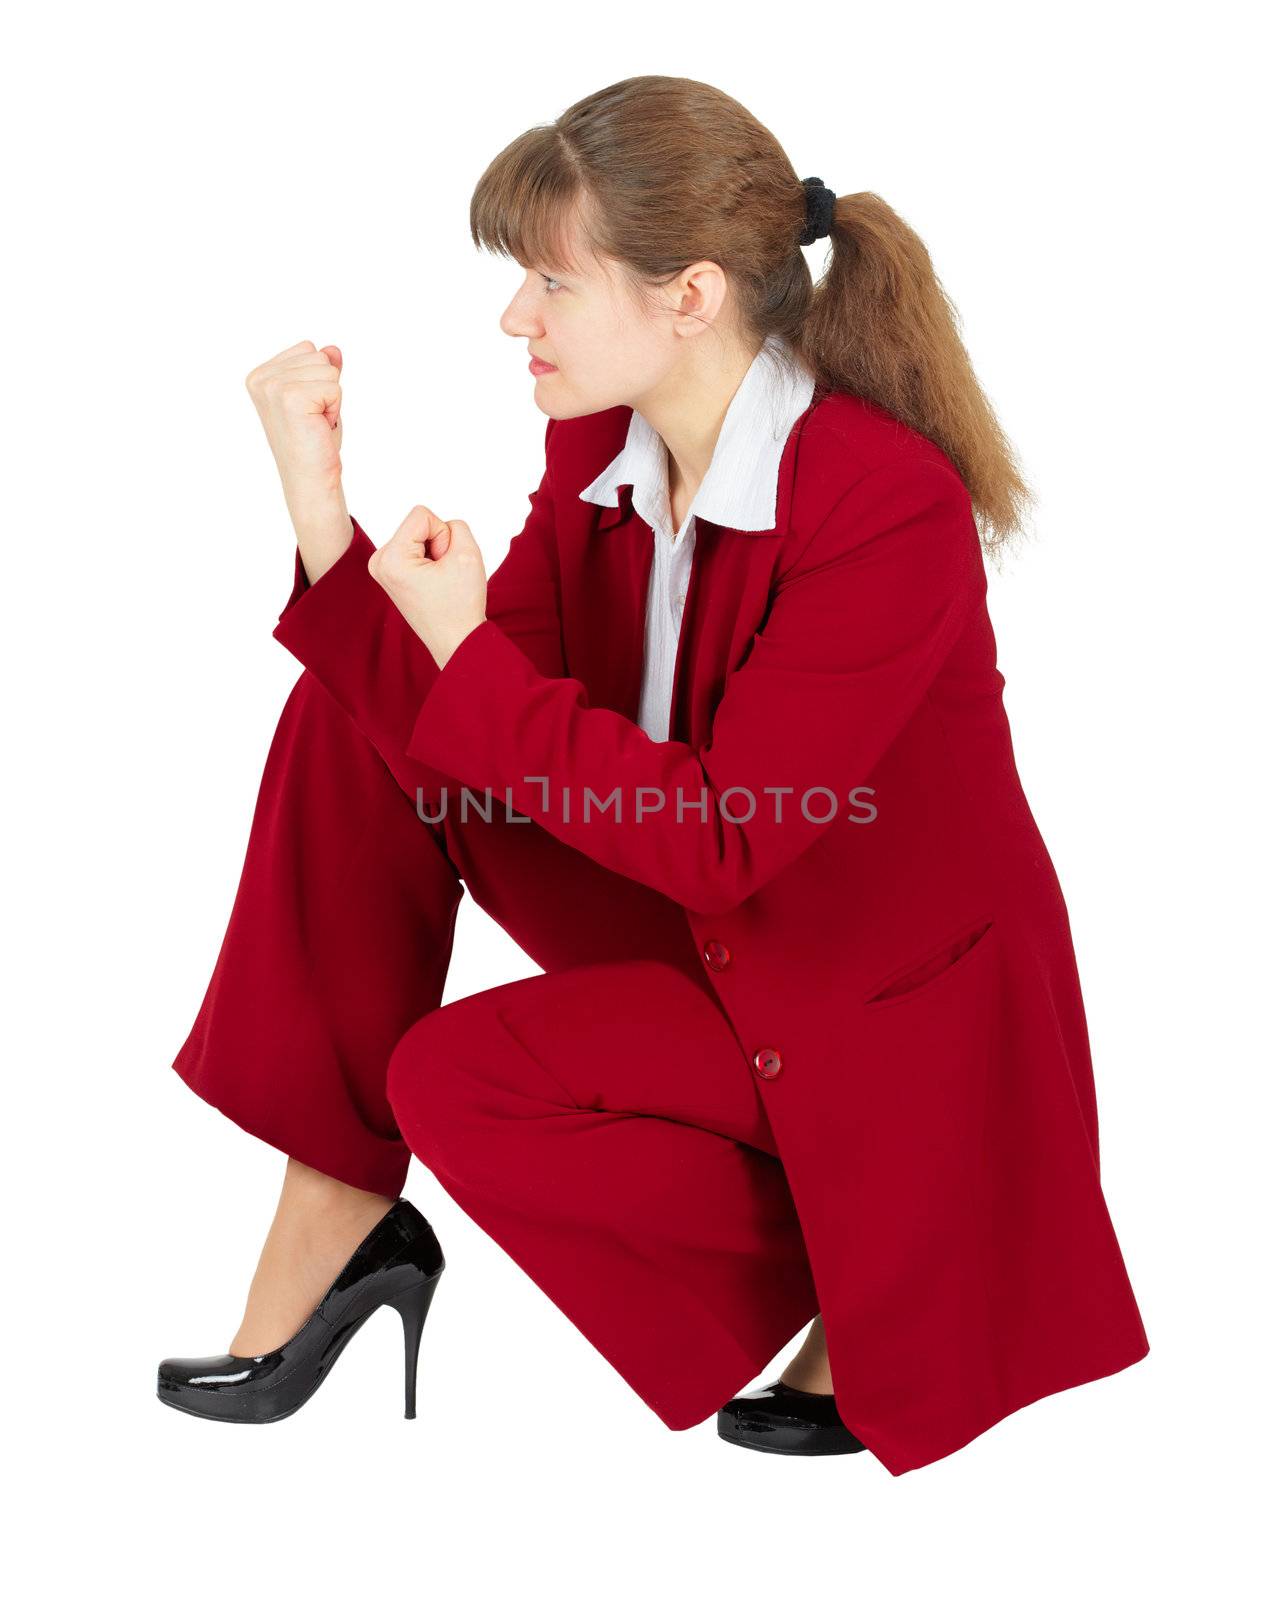 A woman in a red business suit sitting in a combat stance